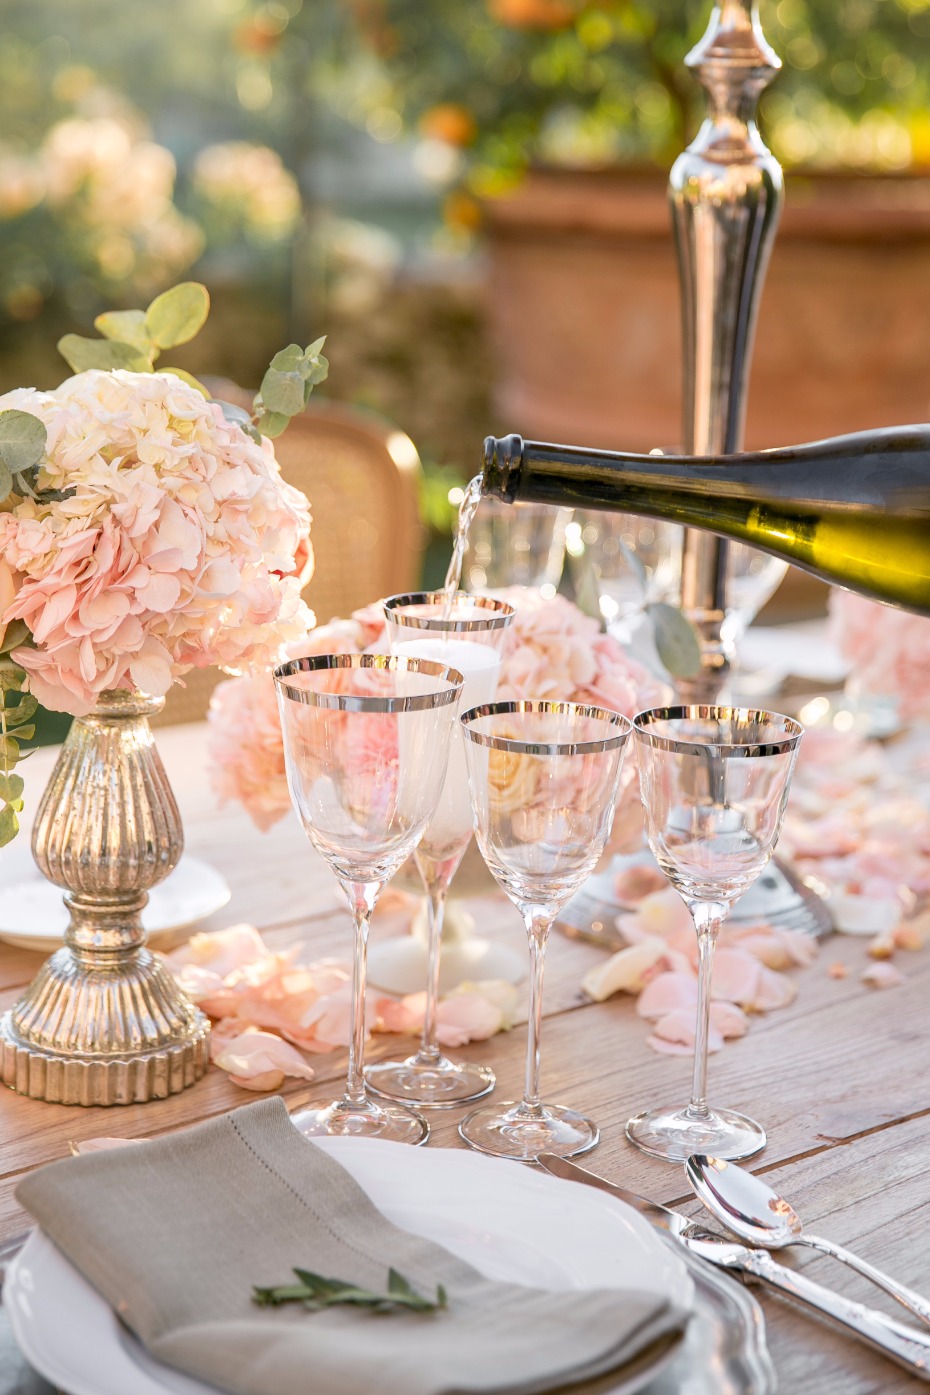 Pink and white table decor